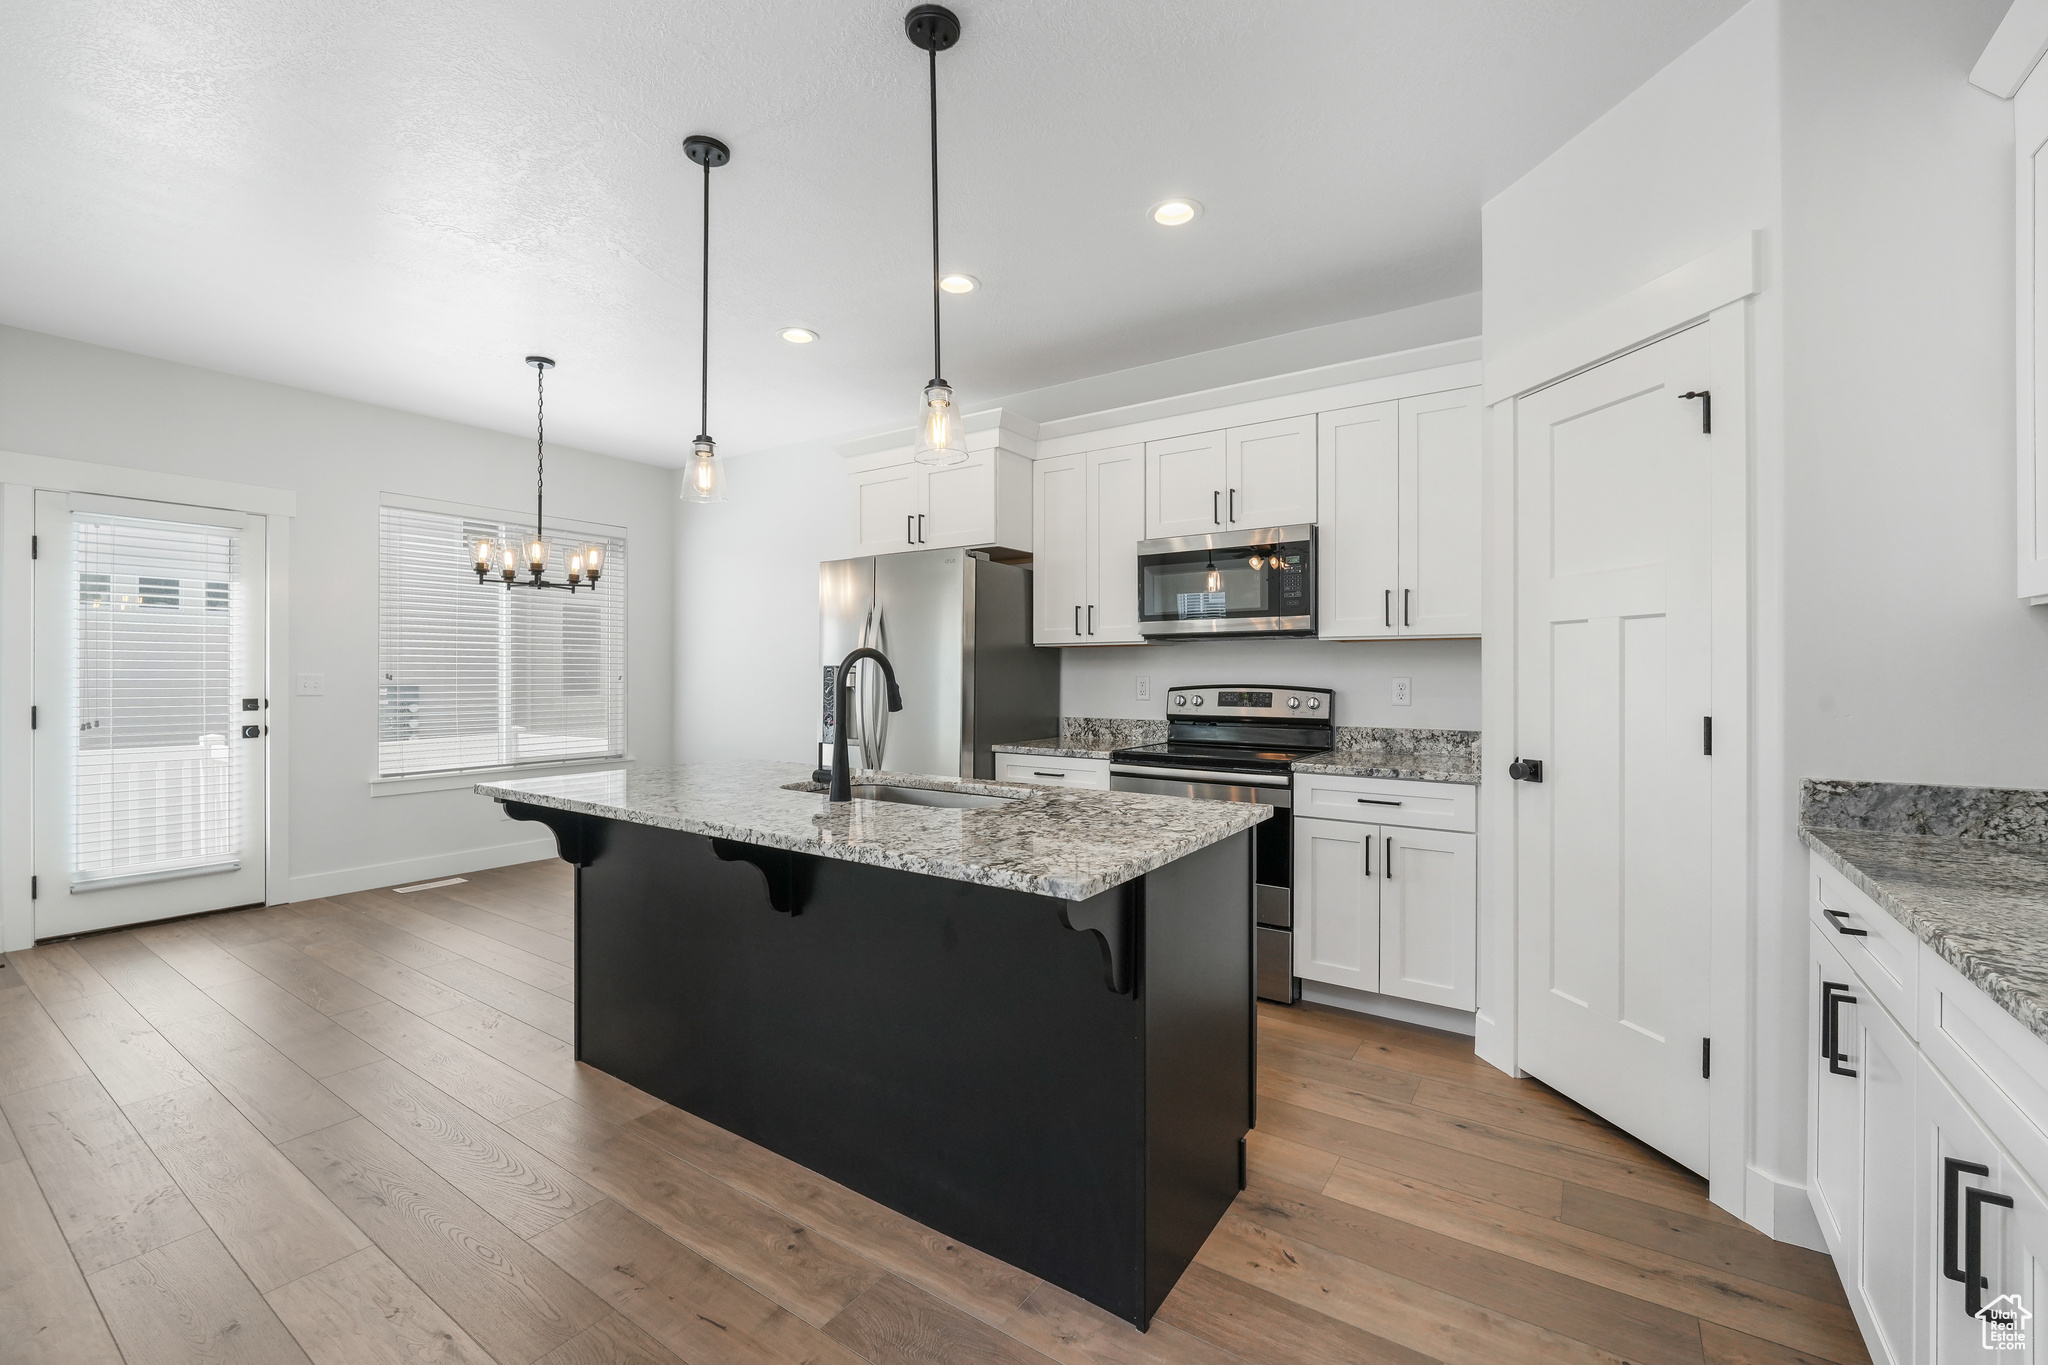 Kitchen featuring appliances with stainless steel finishes, white cabinetry, decorative light fixtures, dark hardwood / wood-style floors, and a kitchen island with sink